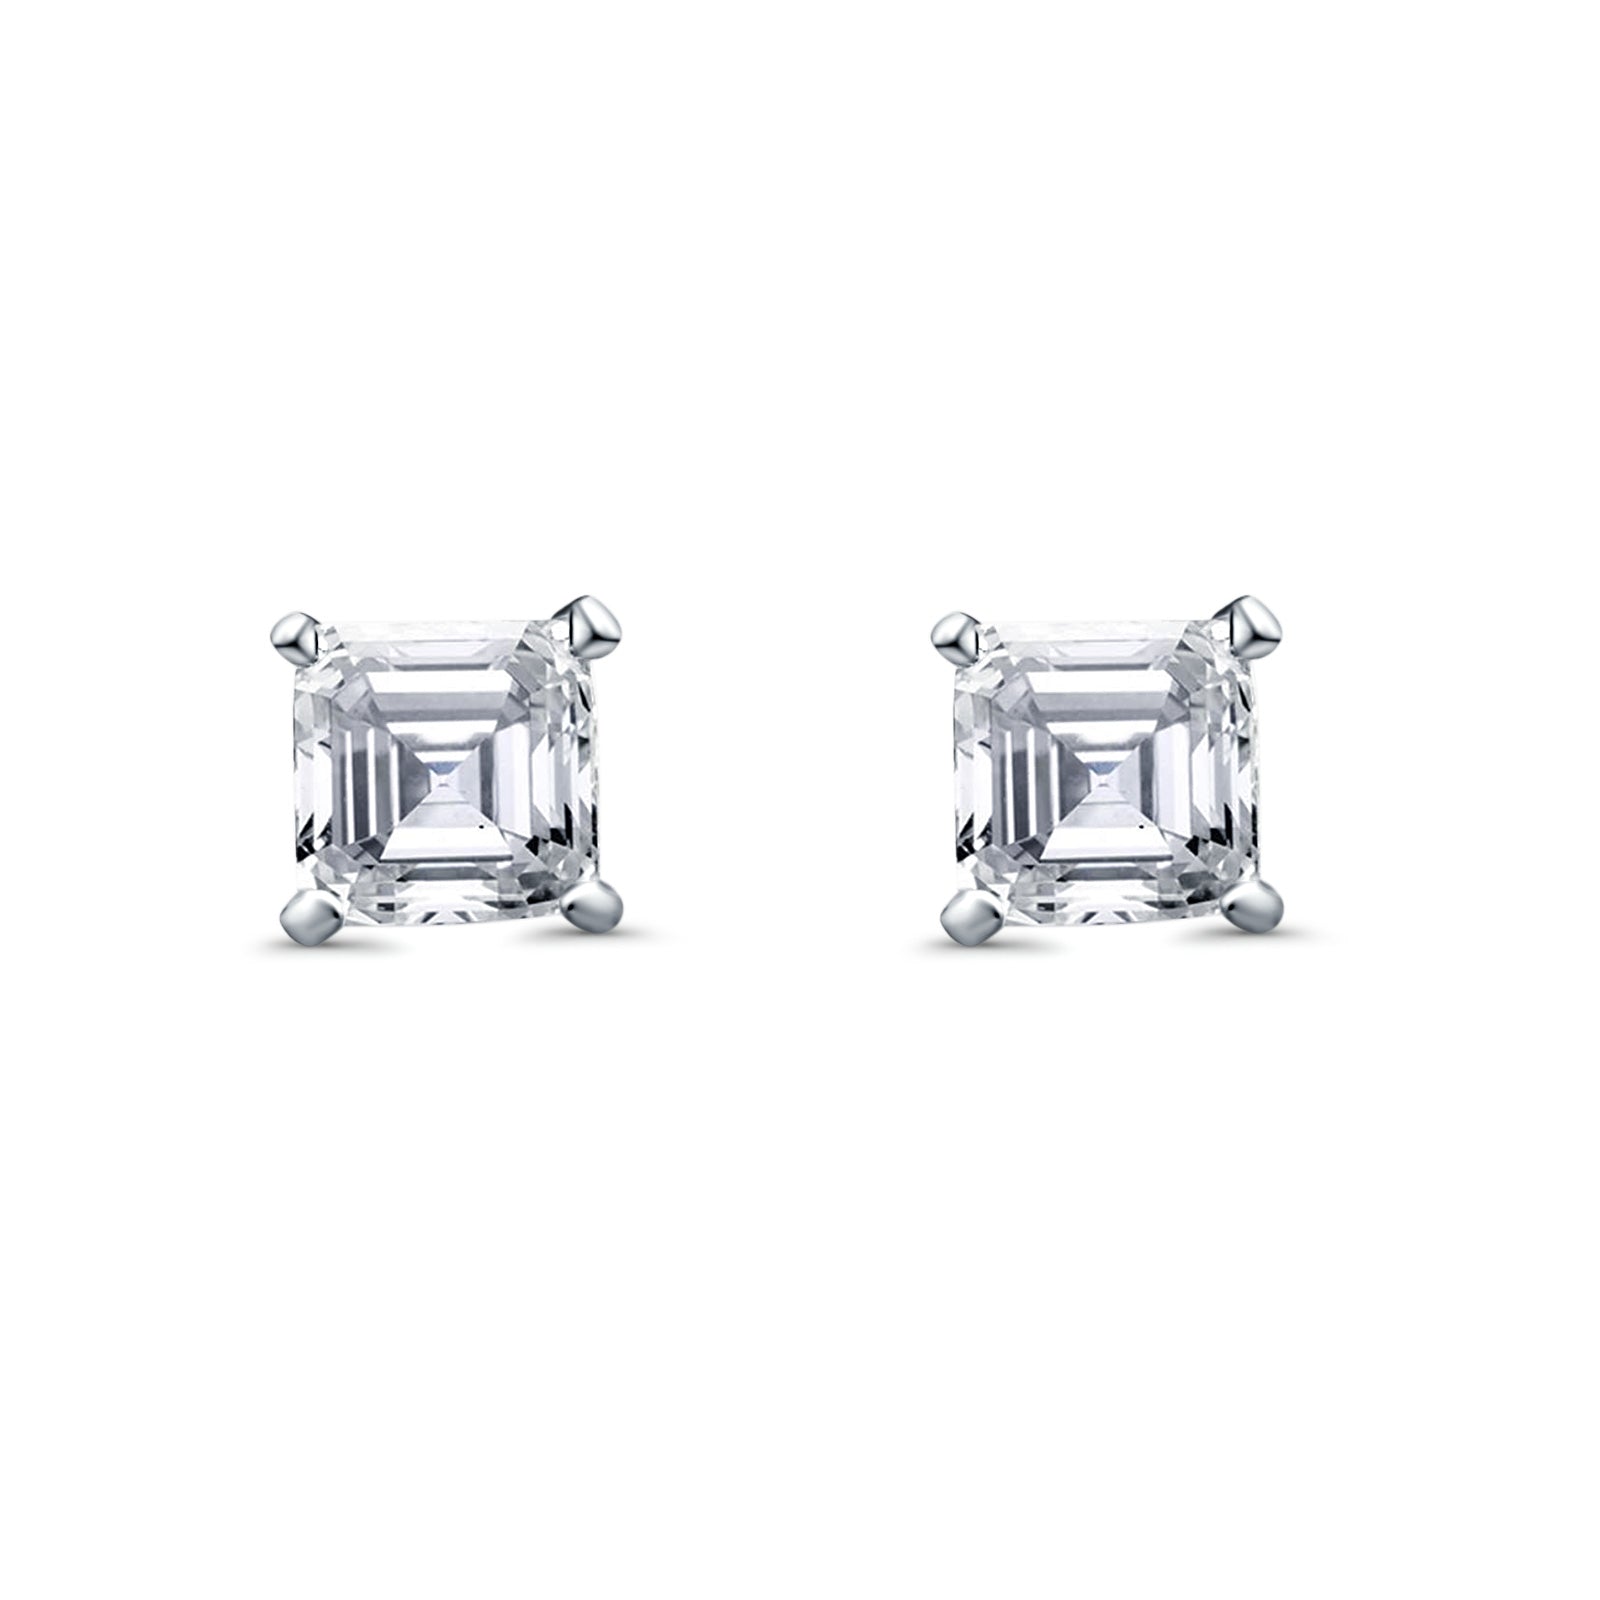 14K White Gold Princess Square CZ Solitaire Basket Set Stud Earrings with Screw Back - 5 Different Size Available, Best Birthday Gift for Her